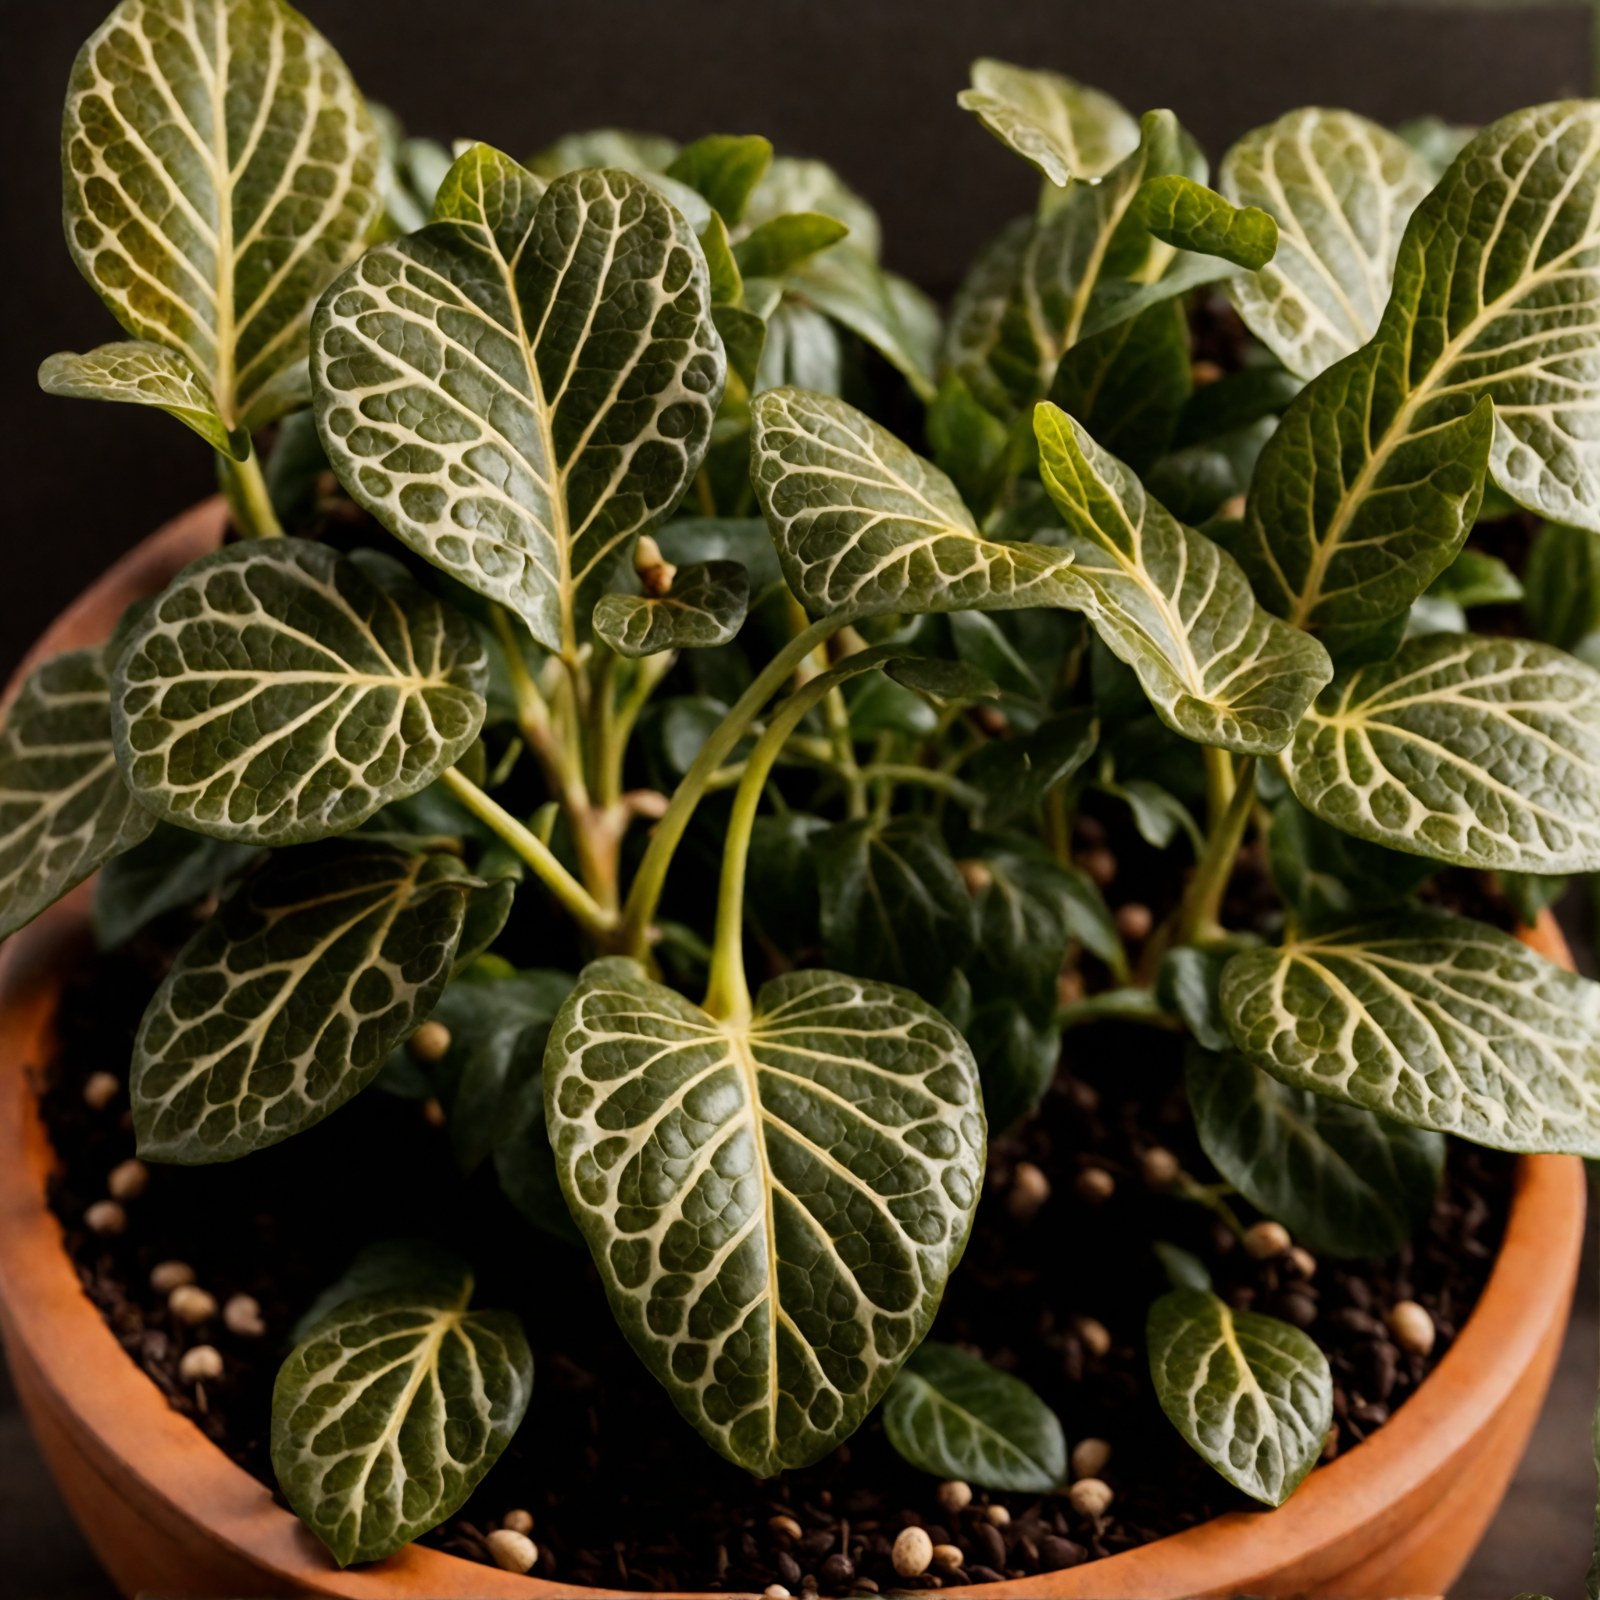 Fittonia albivenis in a bowl planter, with vibrant green leaves, in clear, neutral-lit indoor setting.